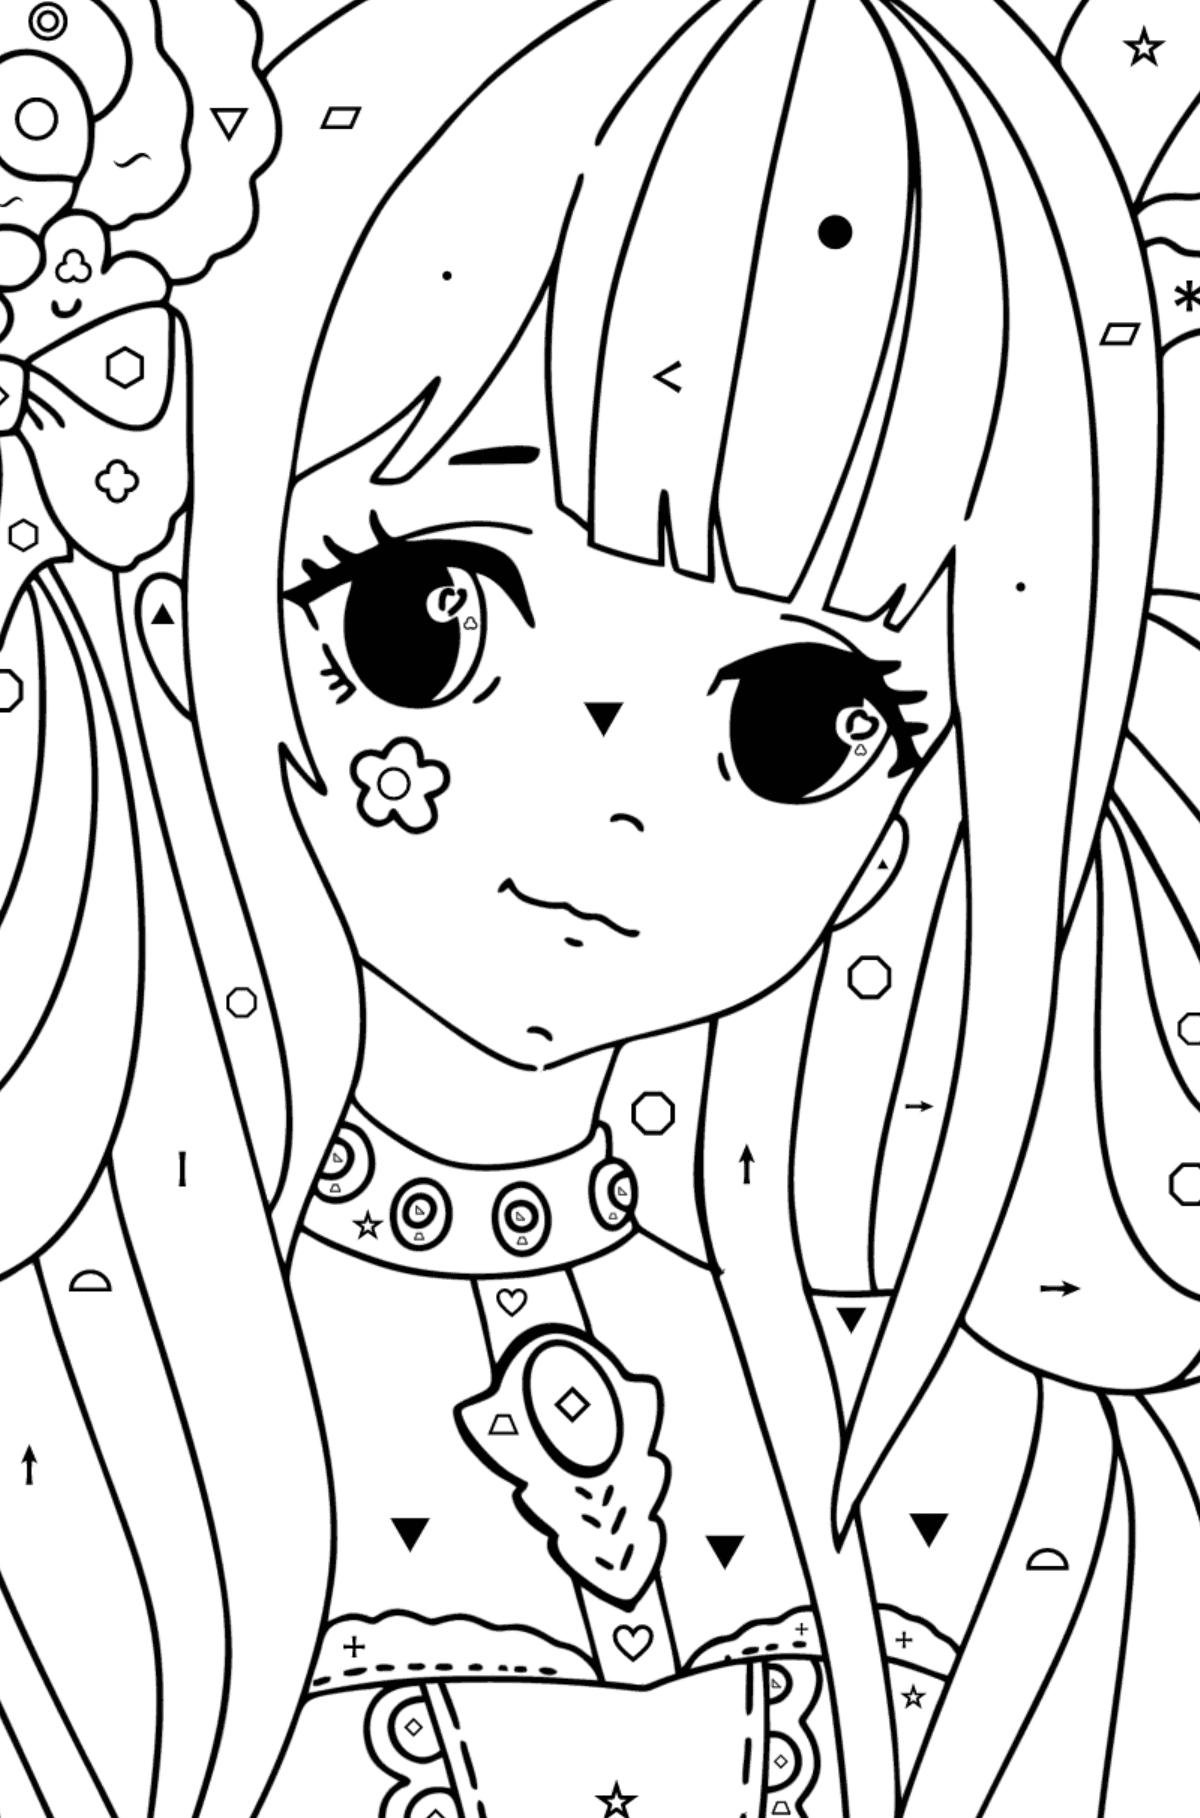 Girl face coloring page - Coloring by Symbols and Geometric Shapes for Kids